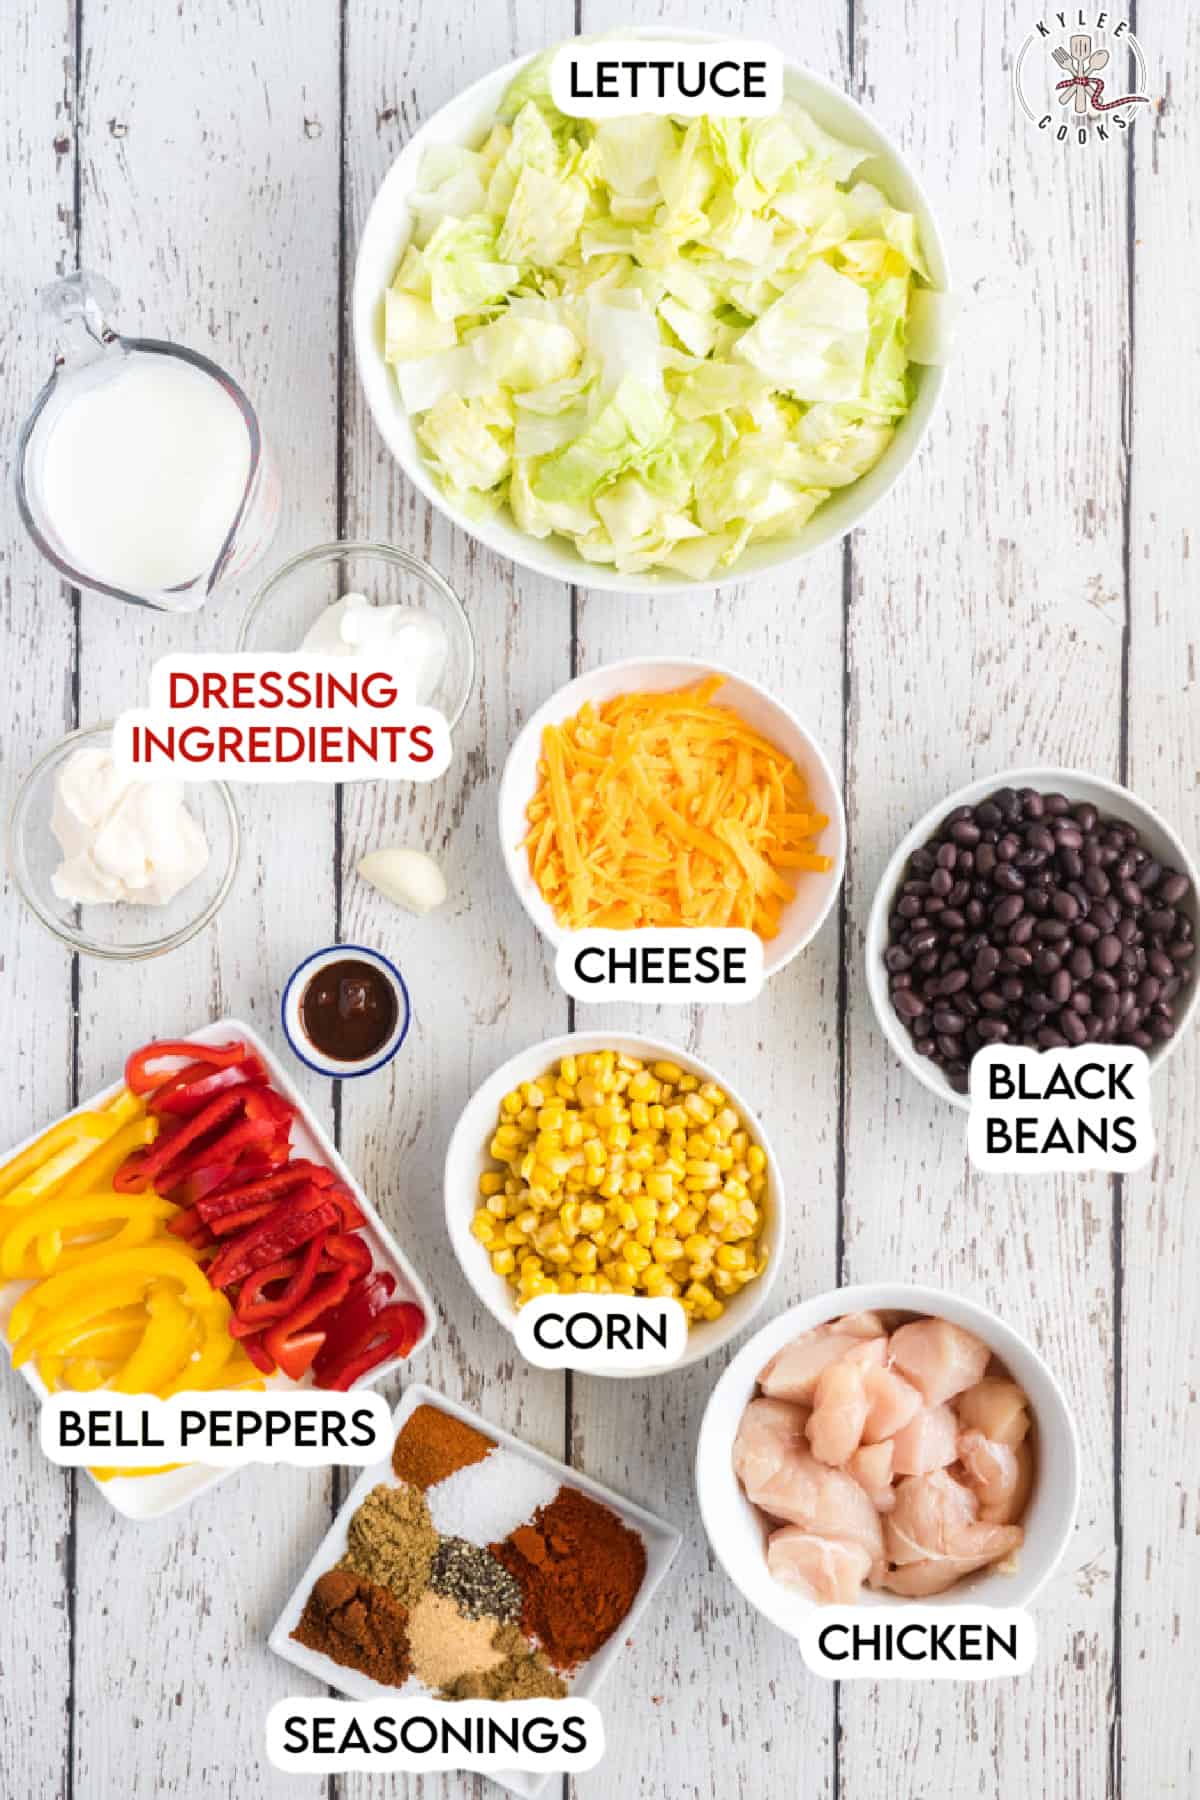 southwestern chicken salad ingredients laid out and labeled